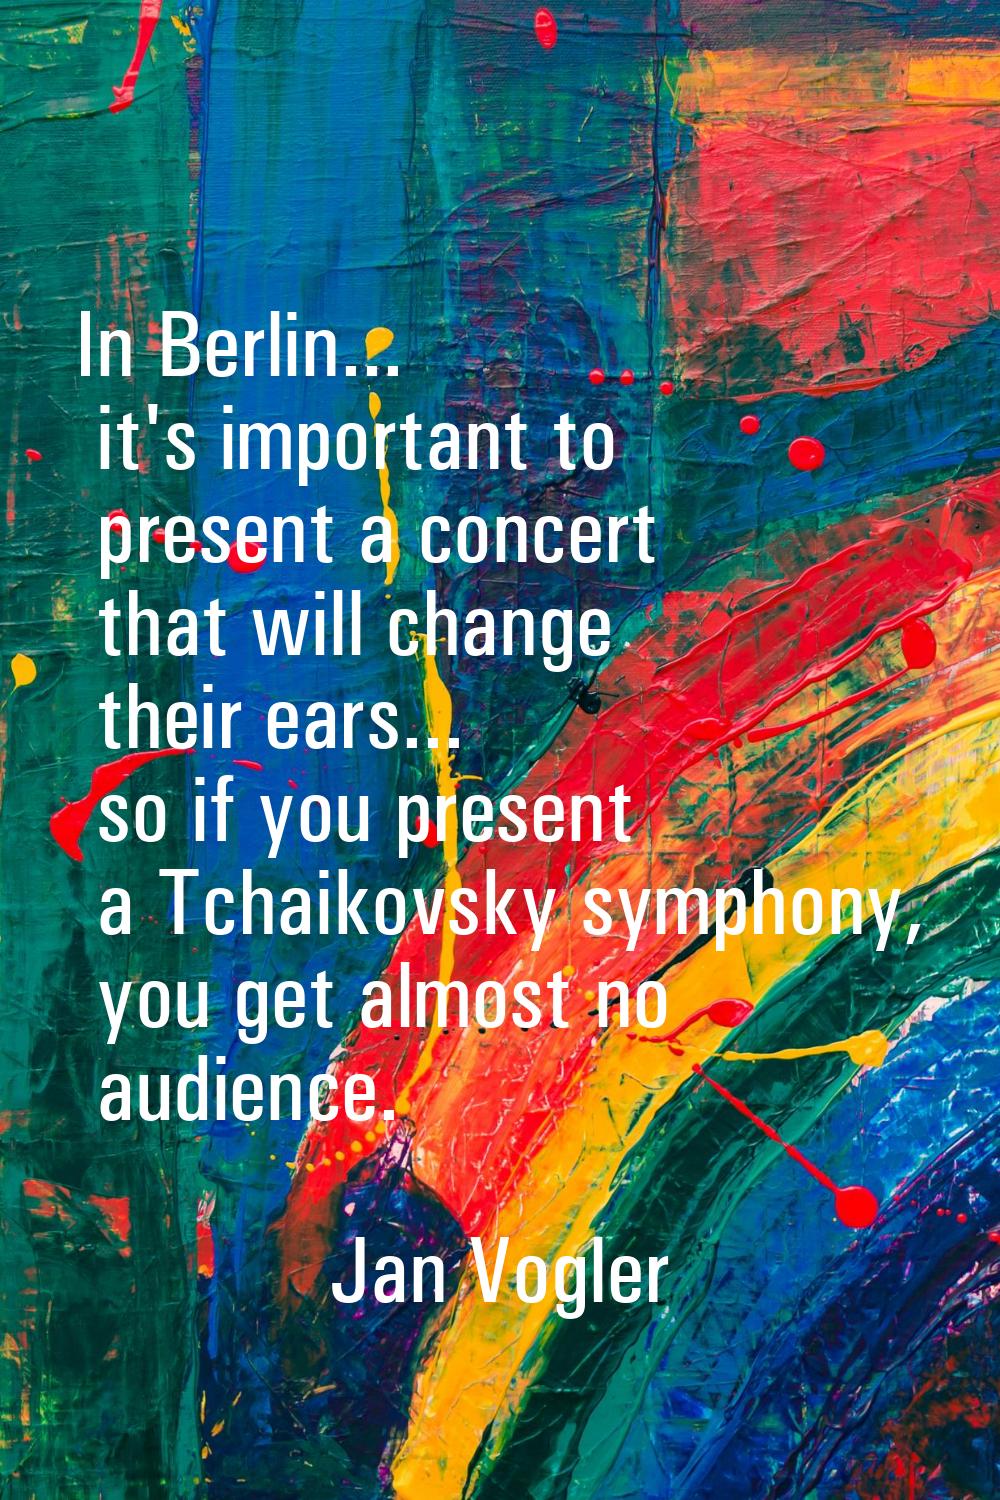 In Berlin... it's important to present a concert that will change their ears... so if you present a